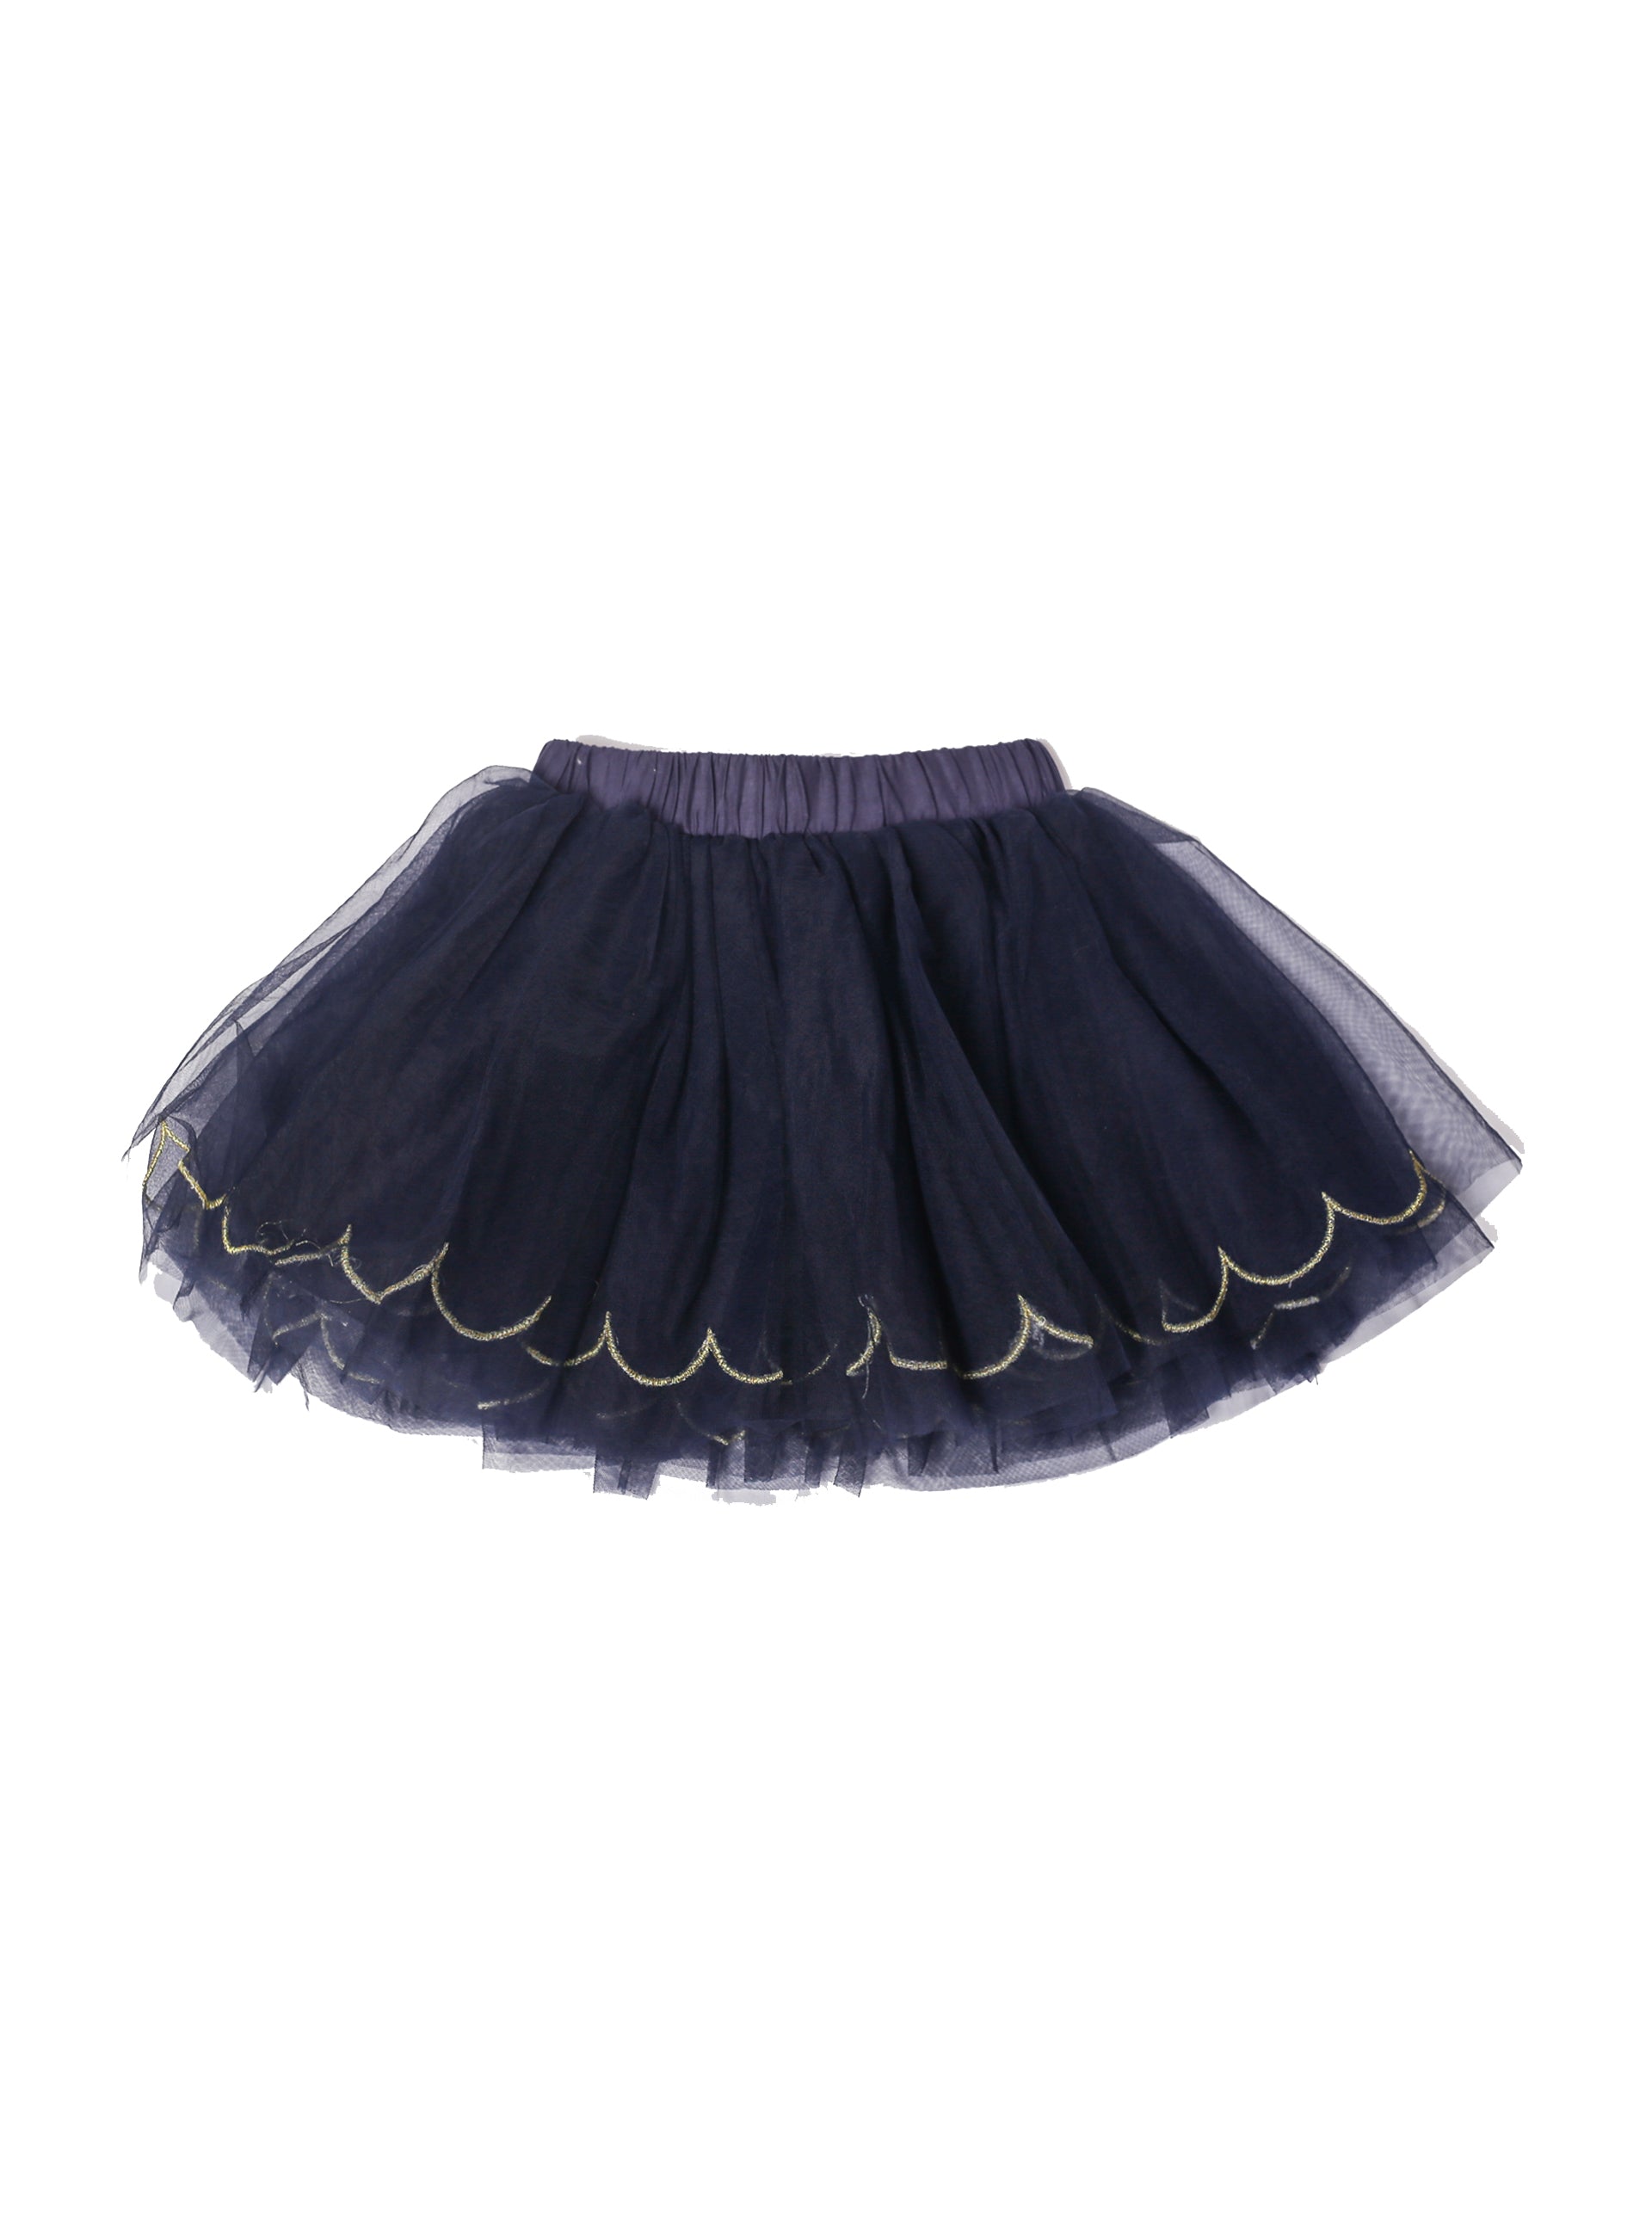 navy blue tutu skirt with gold scallop lining